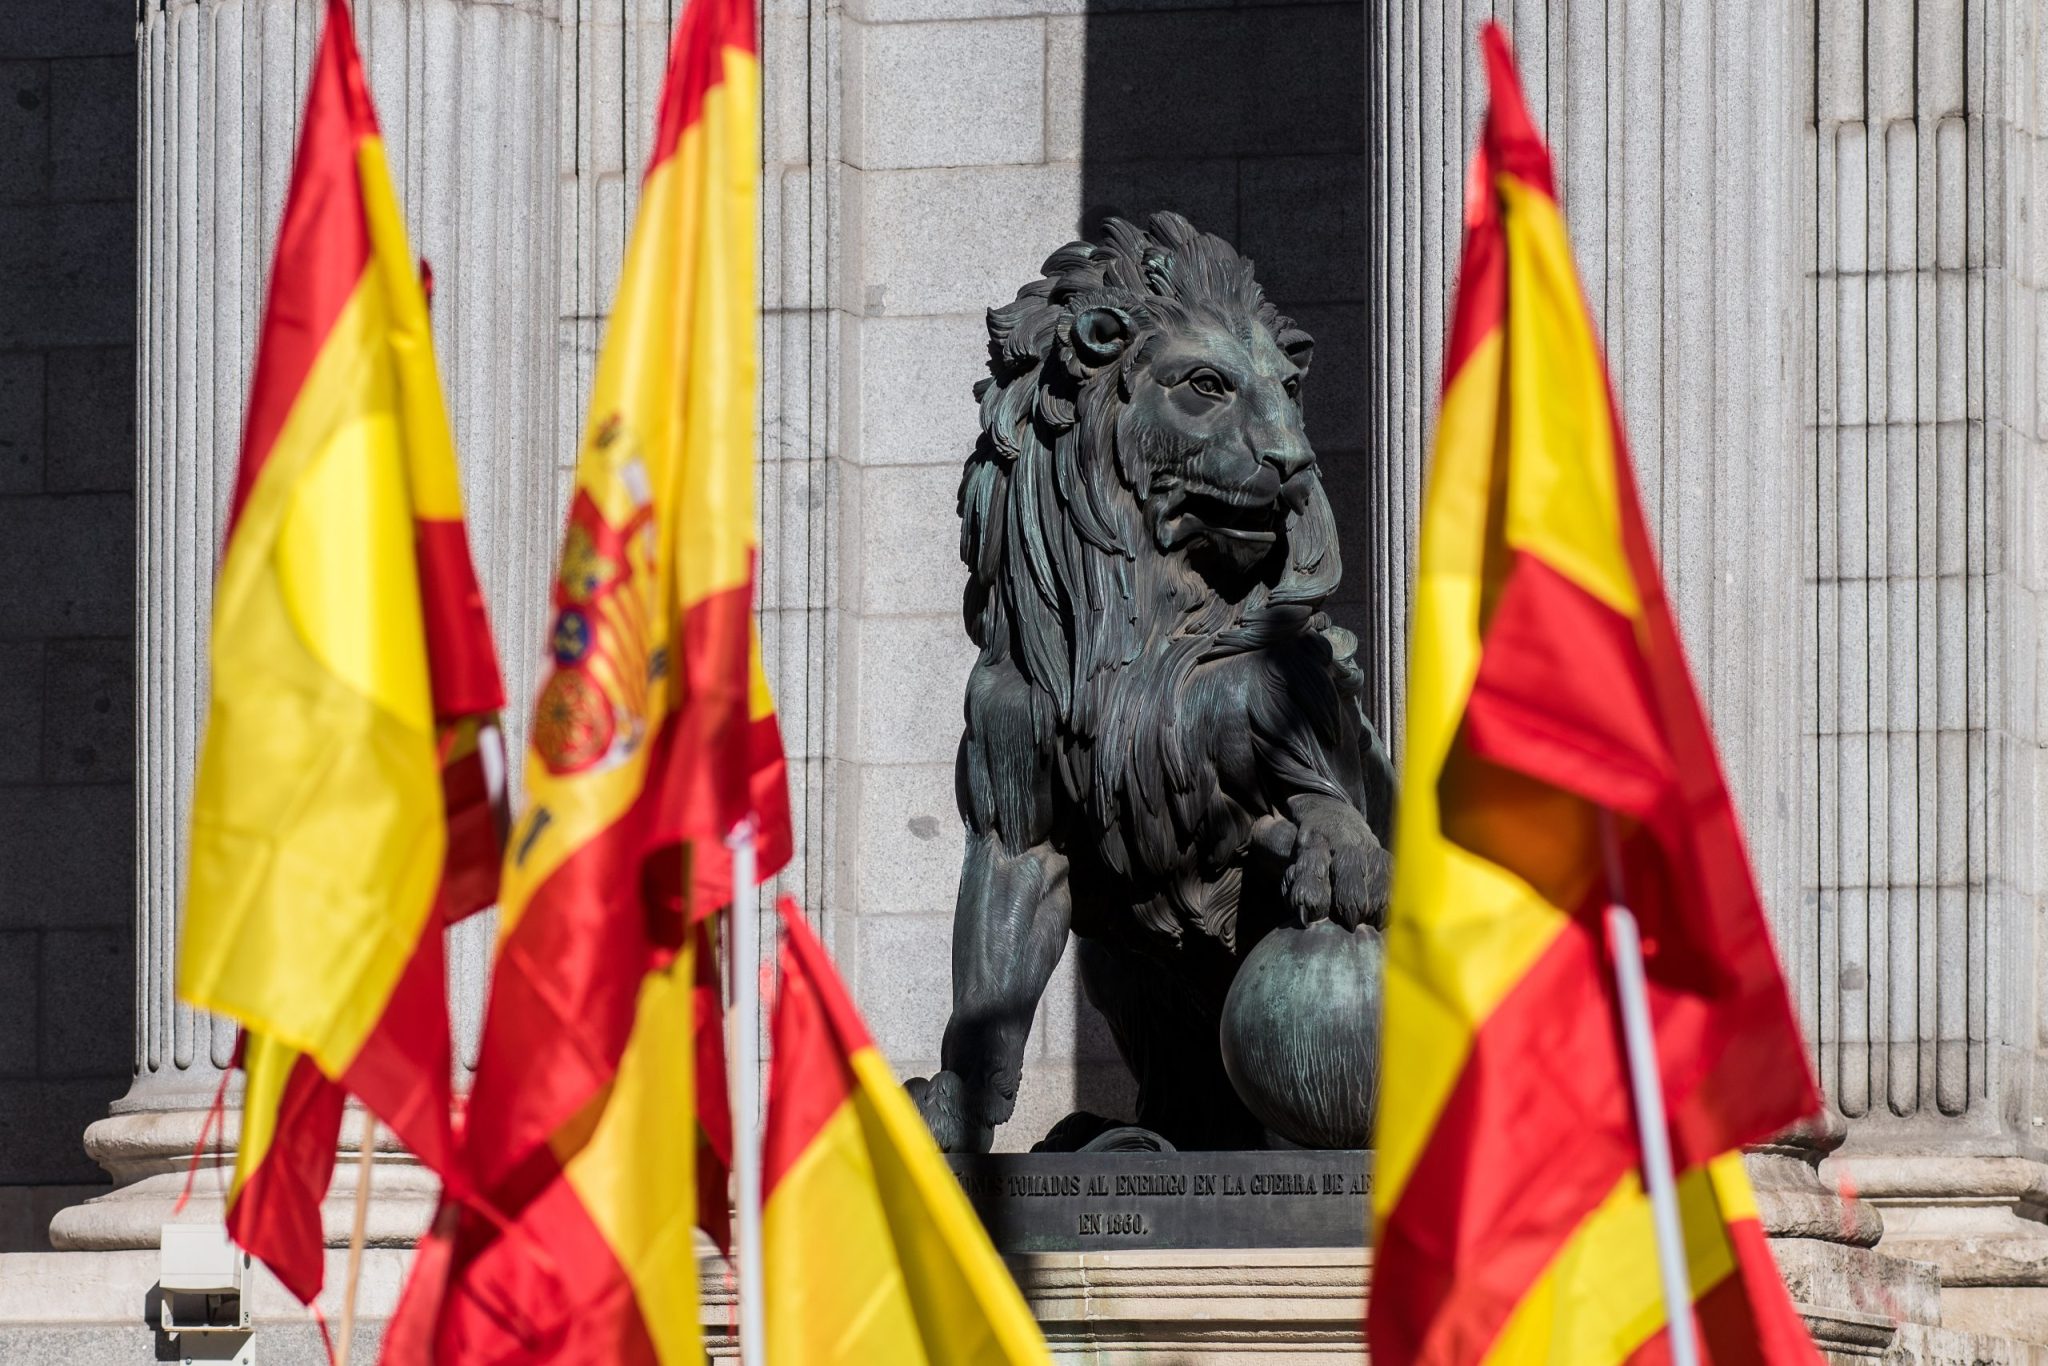 Sculpture of lion in the Congress of Deputies of Madrid with Spanish flags